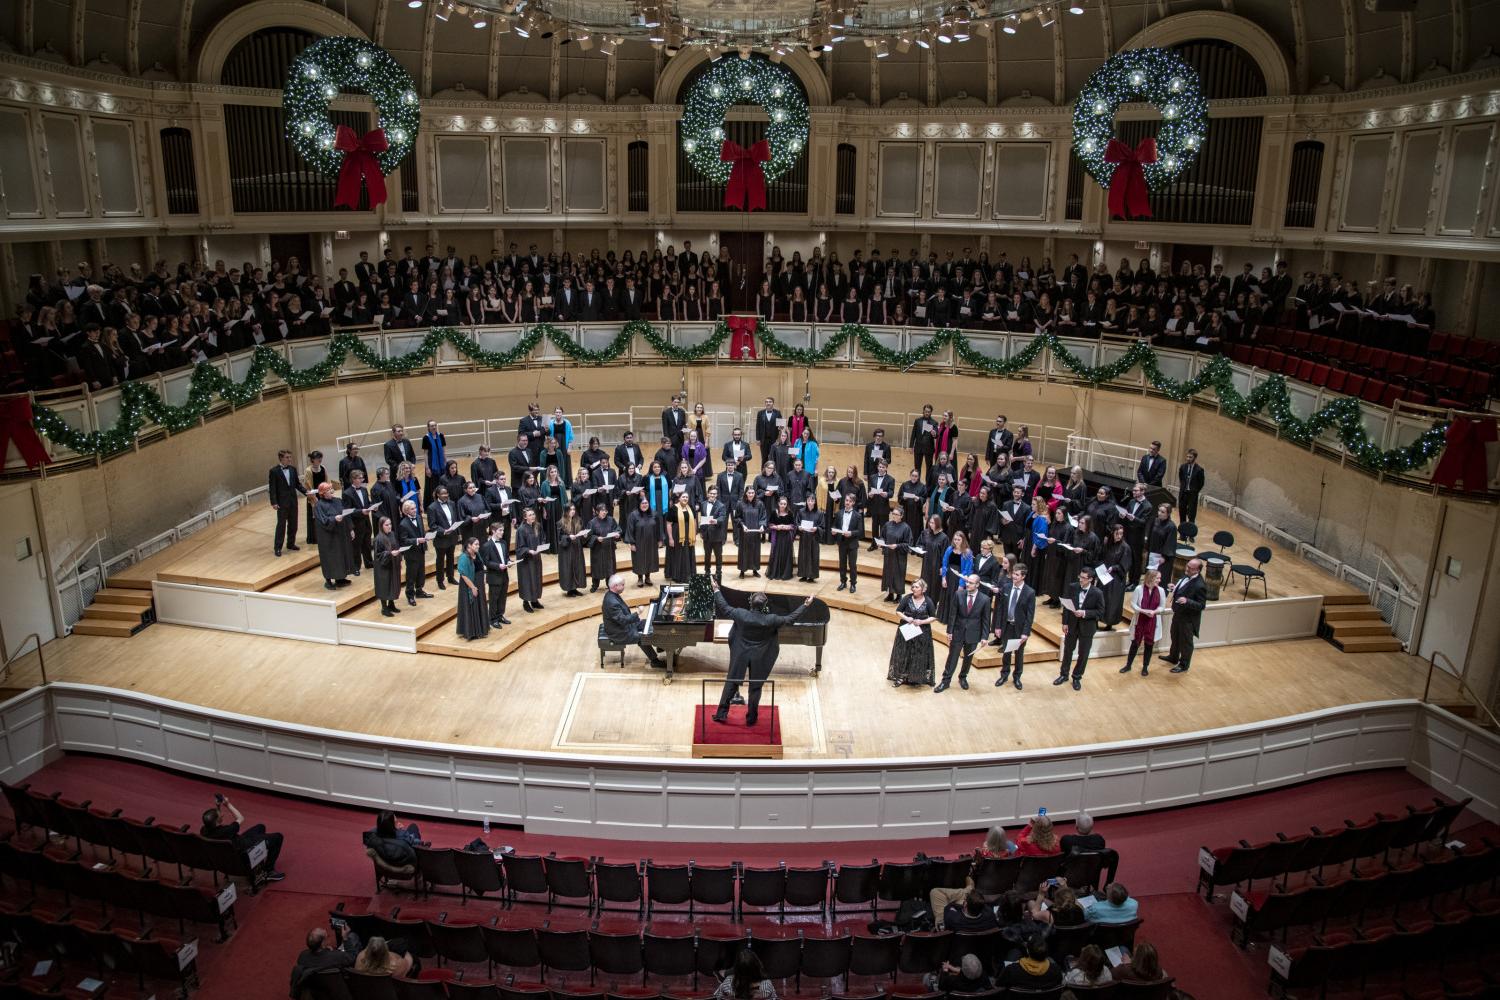 The <a href='http://atvc.braendebriketter.com'>全球十大赌钱排行app</a> Choir performs in the Chicago Symphony Hall.